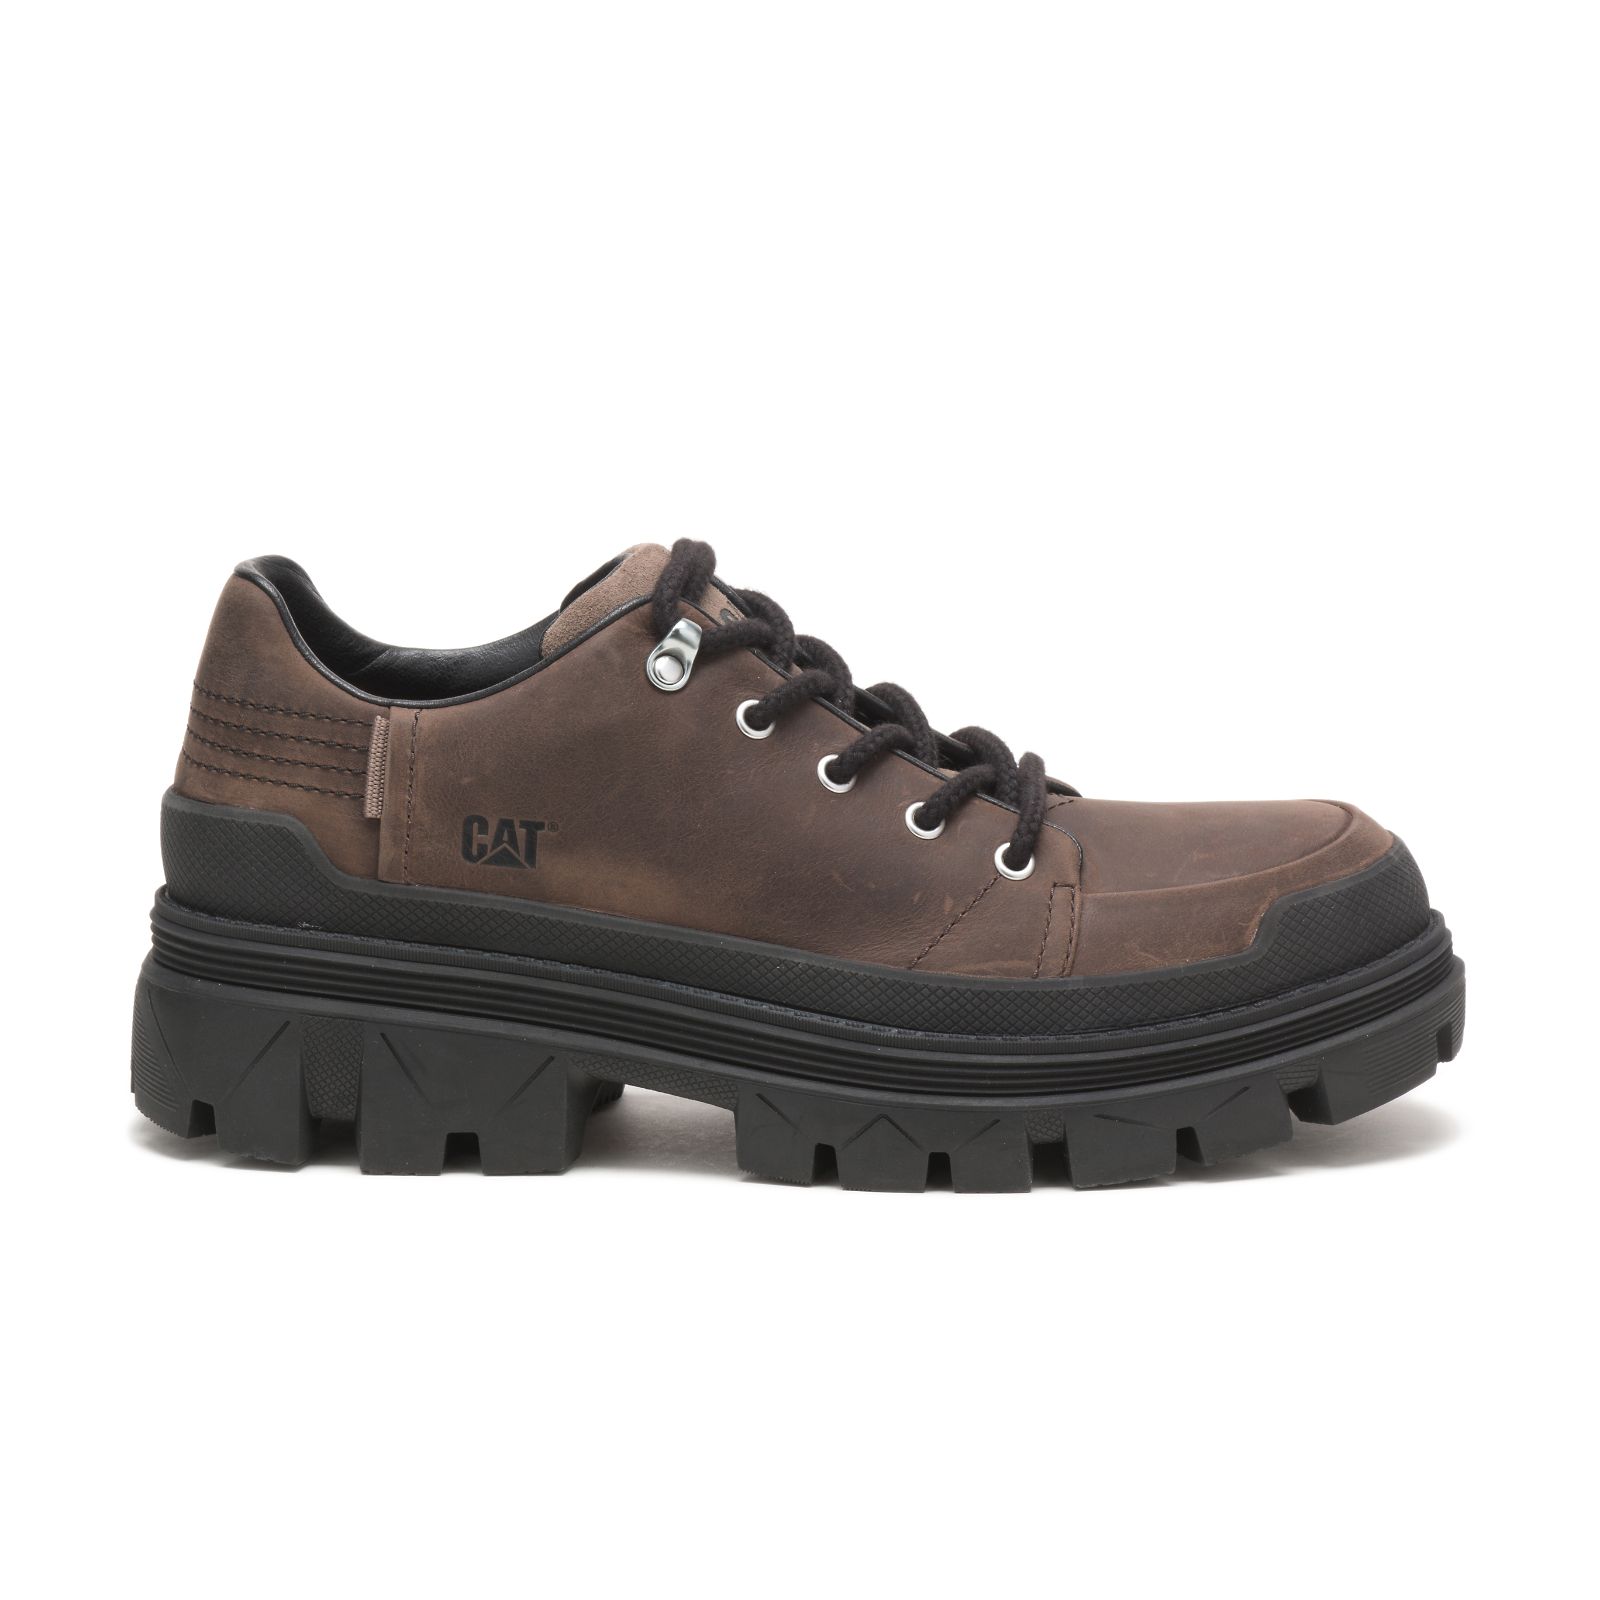 Caterpillar Hardware Lo Philippines - Mens Casual Shoes - Dark Brown/Black 09461YPIT